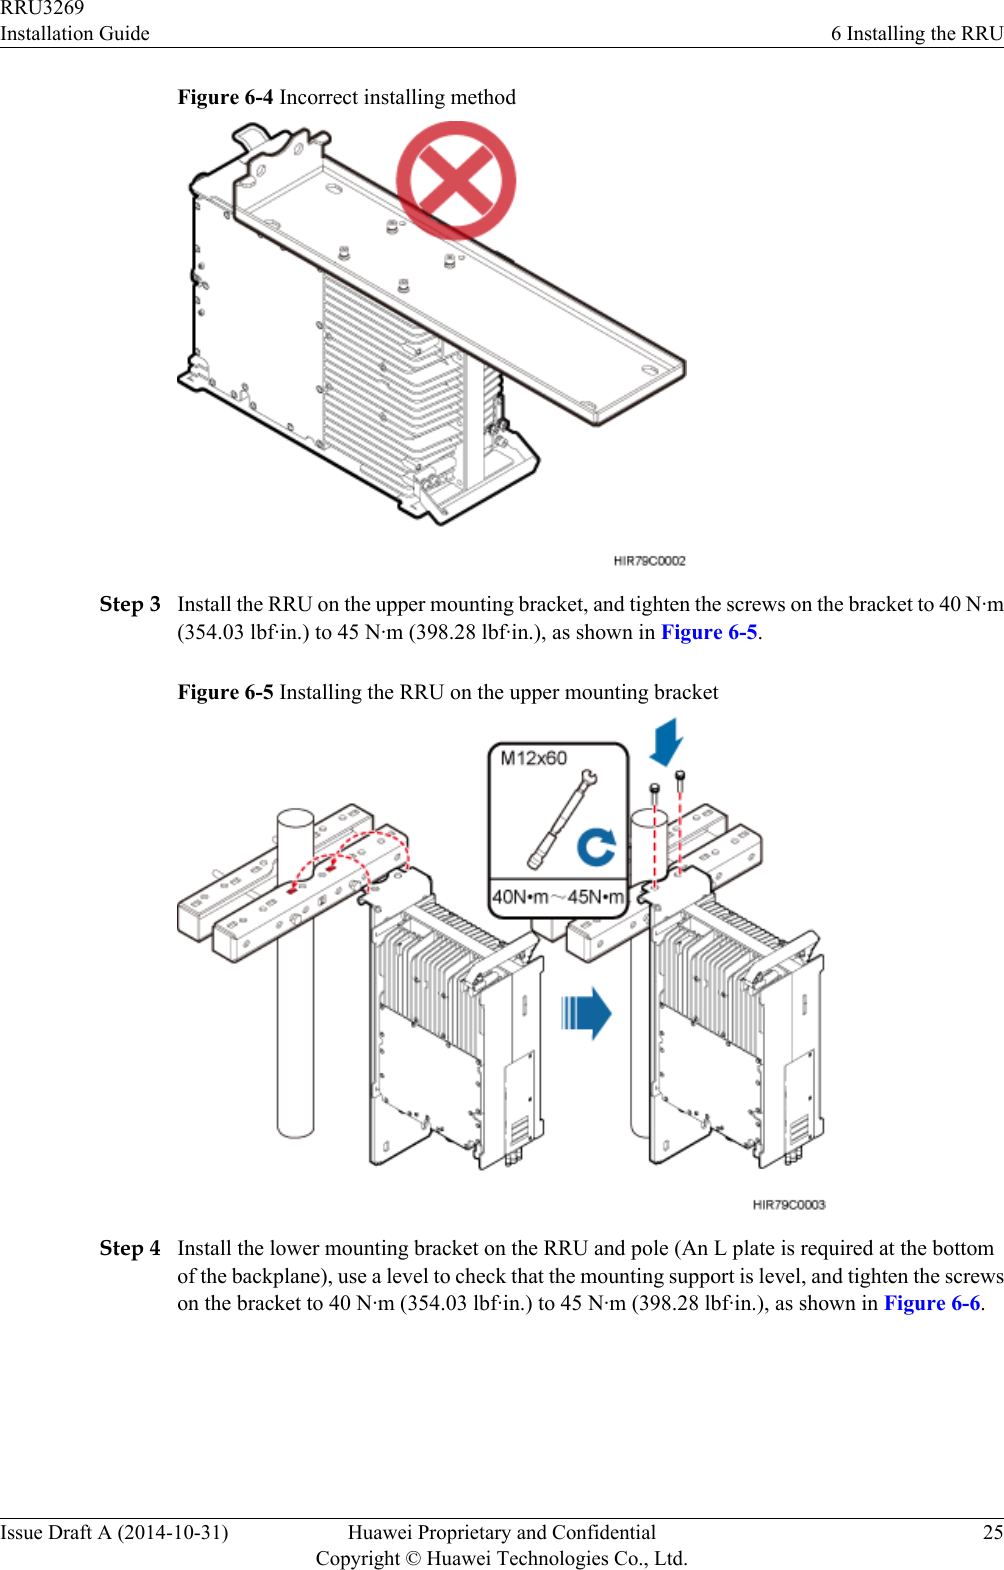 Figure 6-4 Incorrect installing methodStep 3 Install the RRU on the upper mounting bracket, and tighten the screws on the bracket to 40 N·m(354.03 lbf·in.) to 45 N·m (398.28 lbf·in.), as shown in Figure 6-5.Figure 6-5 Installing the RRU on the upper mounting bracketStep 4 Install the lower mounting bracket on the RRU and pole (An L plate is required at the bottomof the backplane), use a level to check that the mounting support is level, and tighten the screwson the bracket to 40 N·m (354.03 lbf·in.) to 45 N·m (398.28 lbf·in.), as shown in Figure 6-6.RRU3269Installation Guide 6 Installing the RRUIssue Draft A (2014-10-31) Huawei Proprietary and ConfidentialCopyright © Huawei Technologies Co., Ltd.25